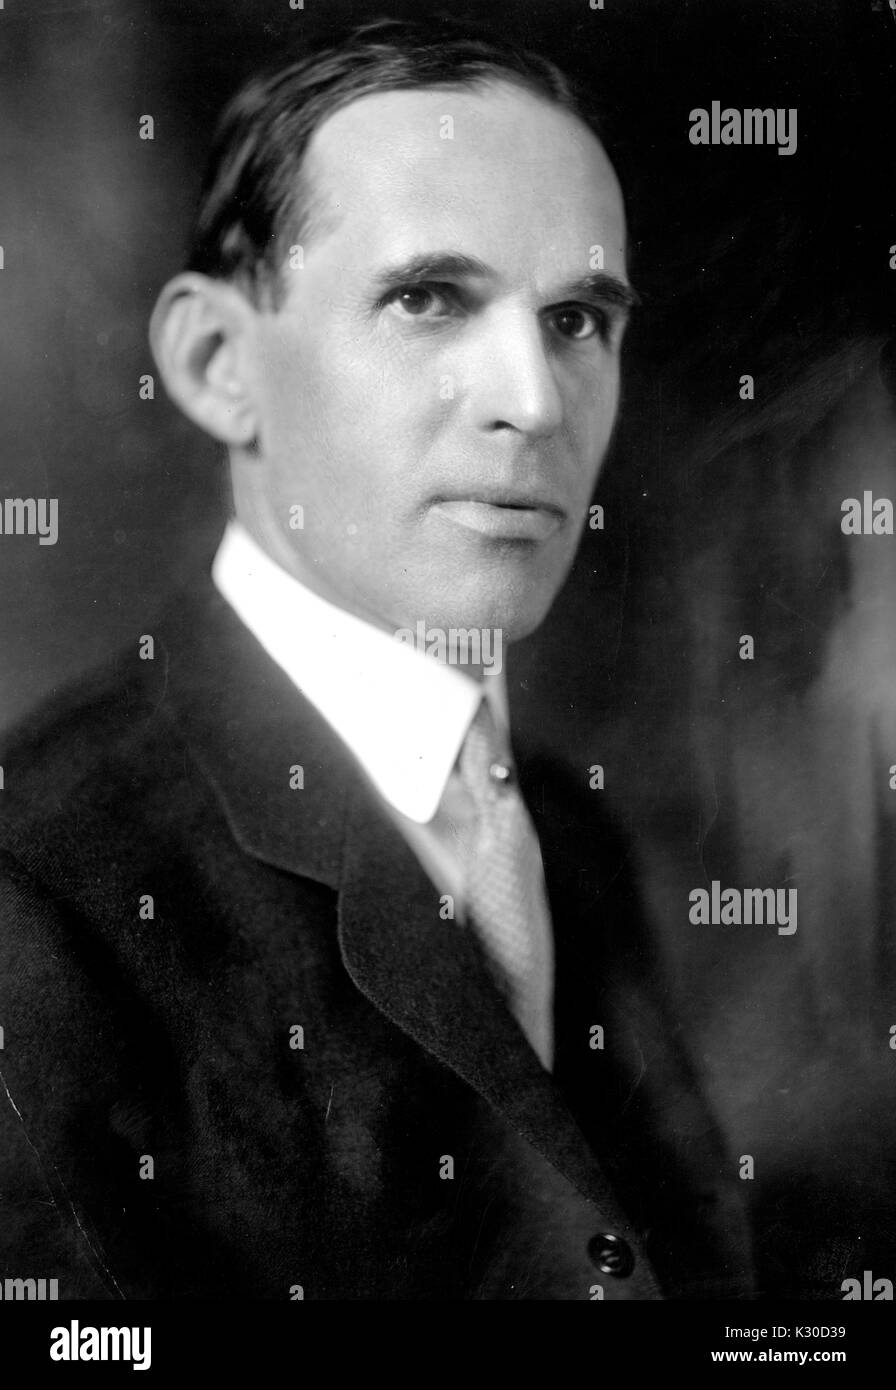 Portrait, shoulders up, of Walter Wheeler Cook, visiting professor of jurisprudence at Johns Hopkins University, slightly turned with stern face, Baltimore, Maryland, 1928. Stock Photo